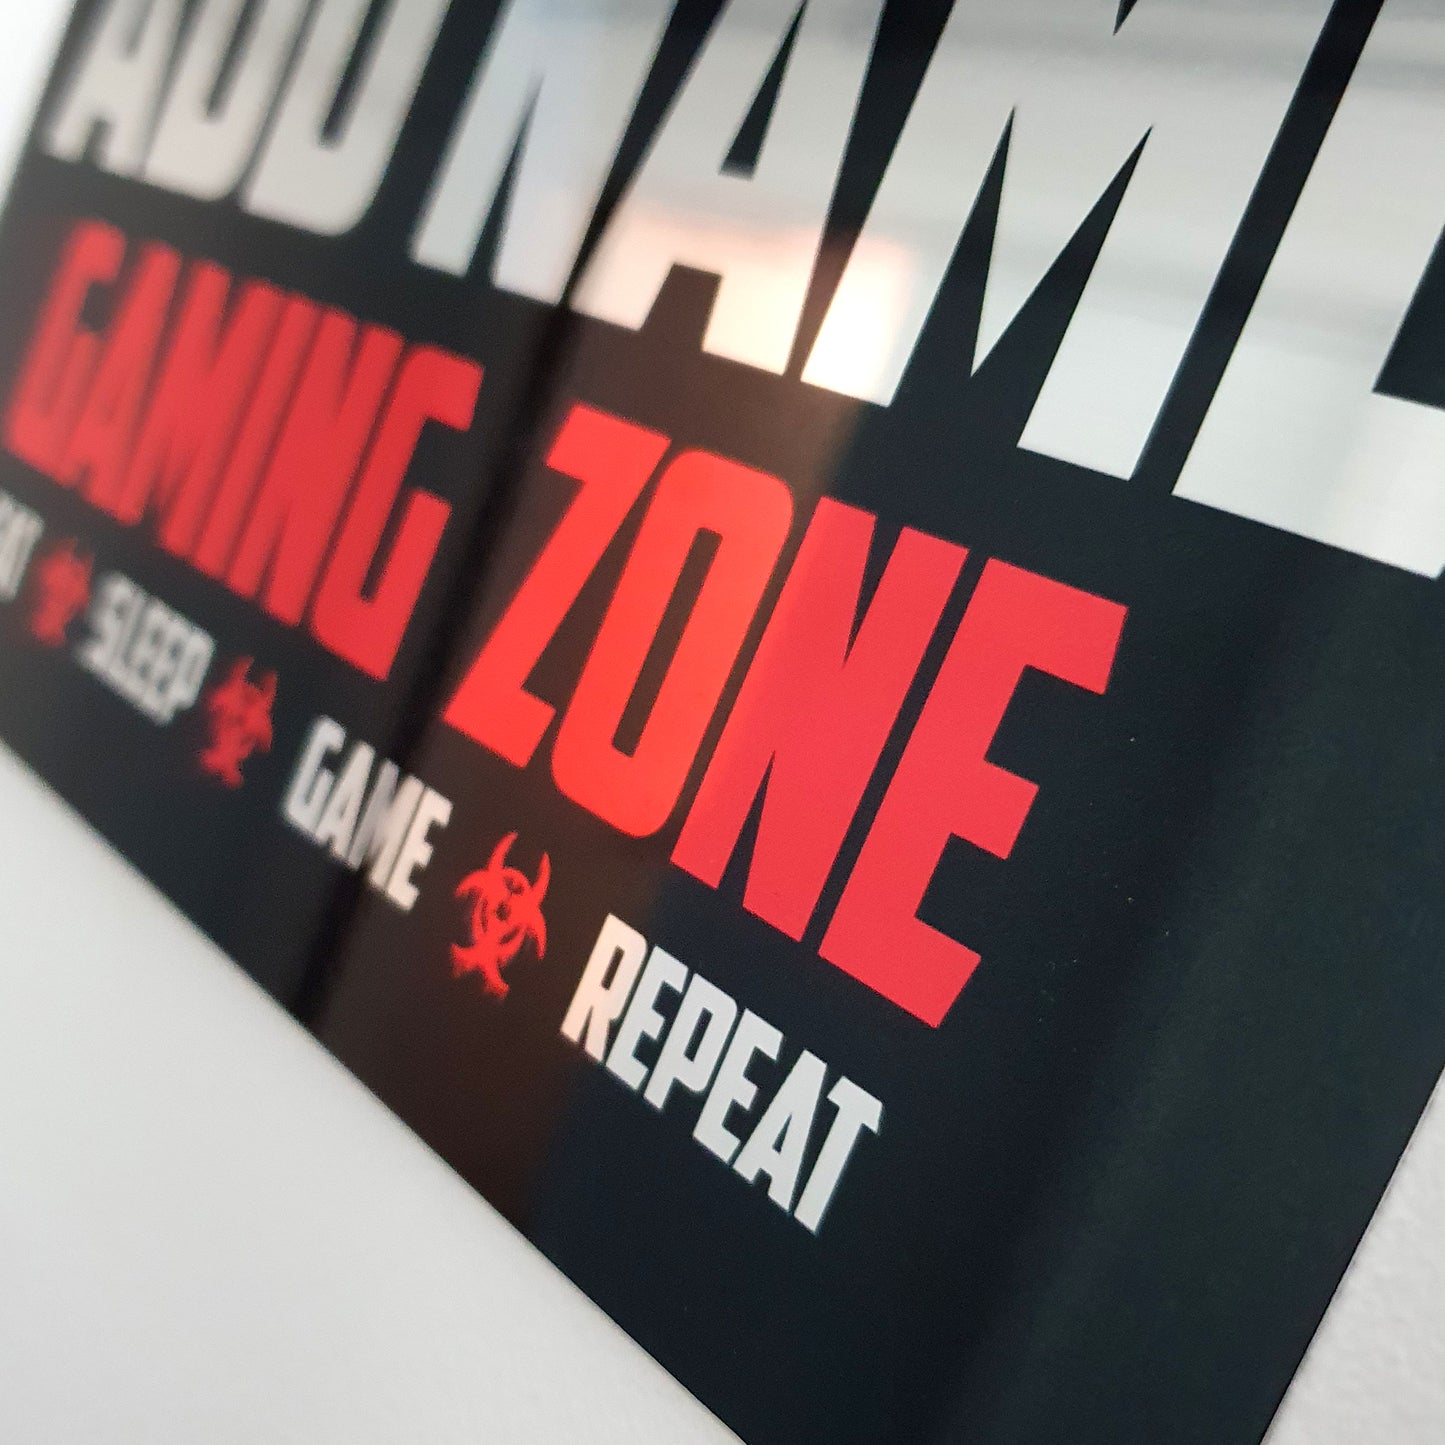 Personalised Metal Mirror Red Gamer Sign - Gaming Zone Caution